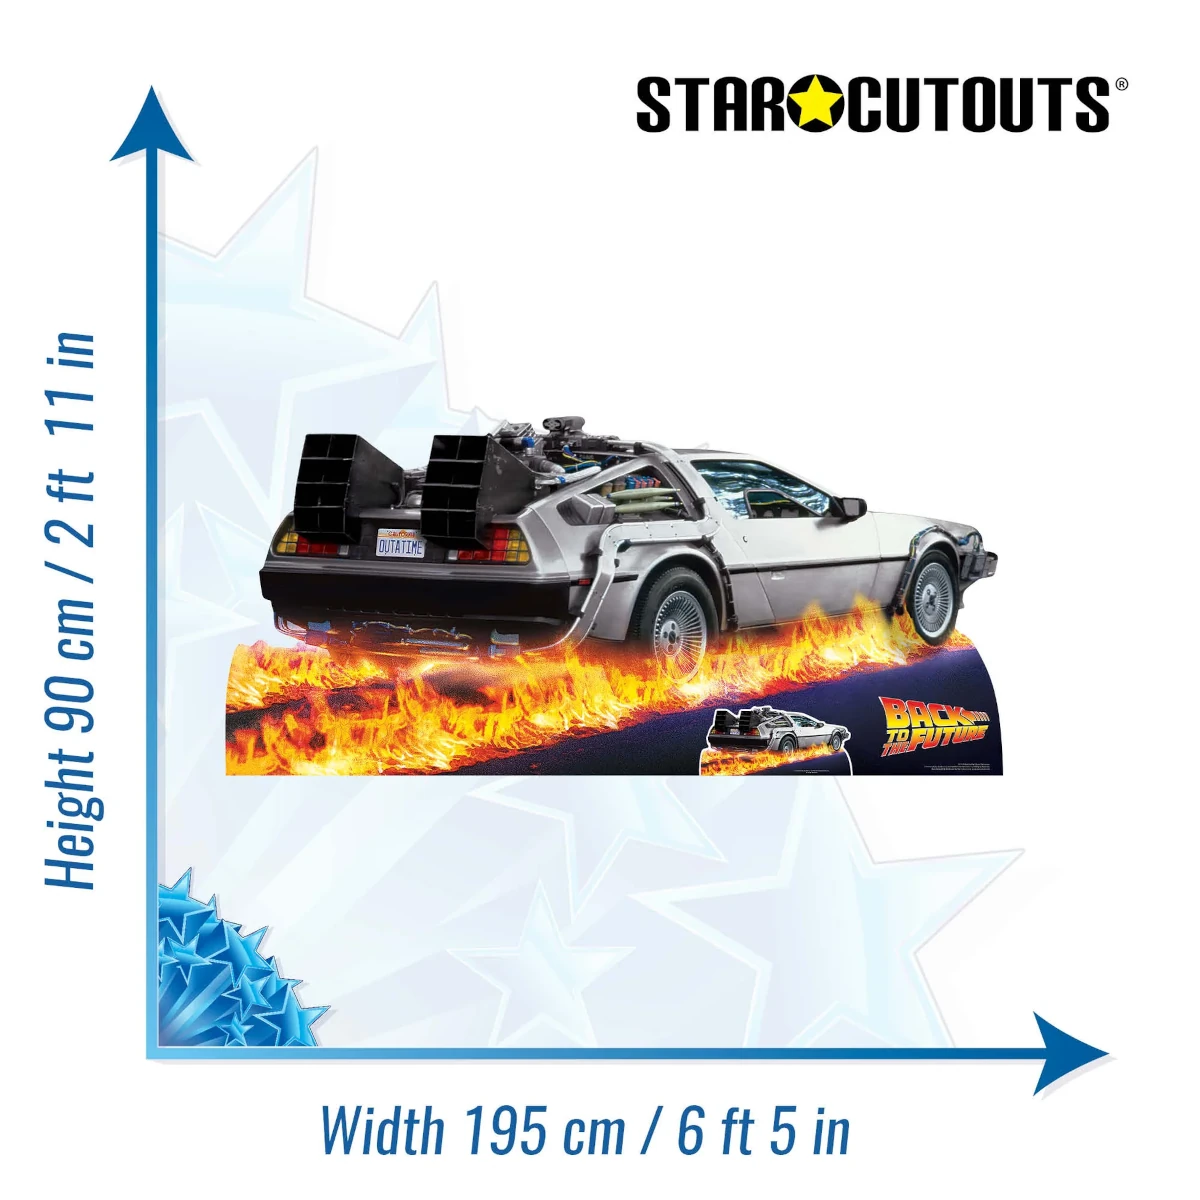 SC1574 DeLorean Car (Back To The Future) Official Large + Mini Cardboard Cutout Standee Size